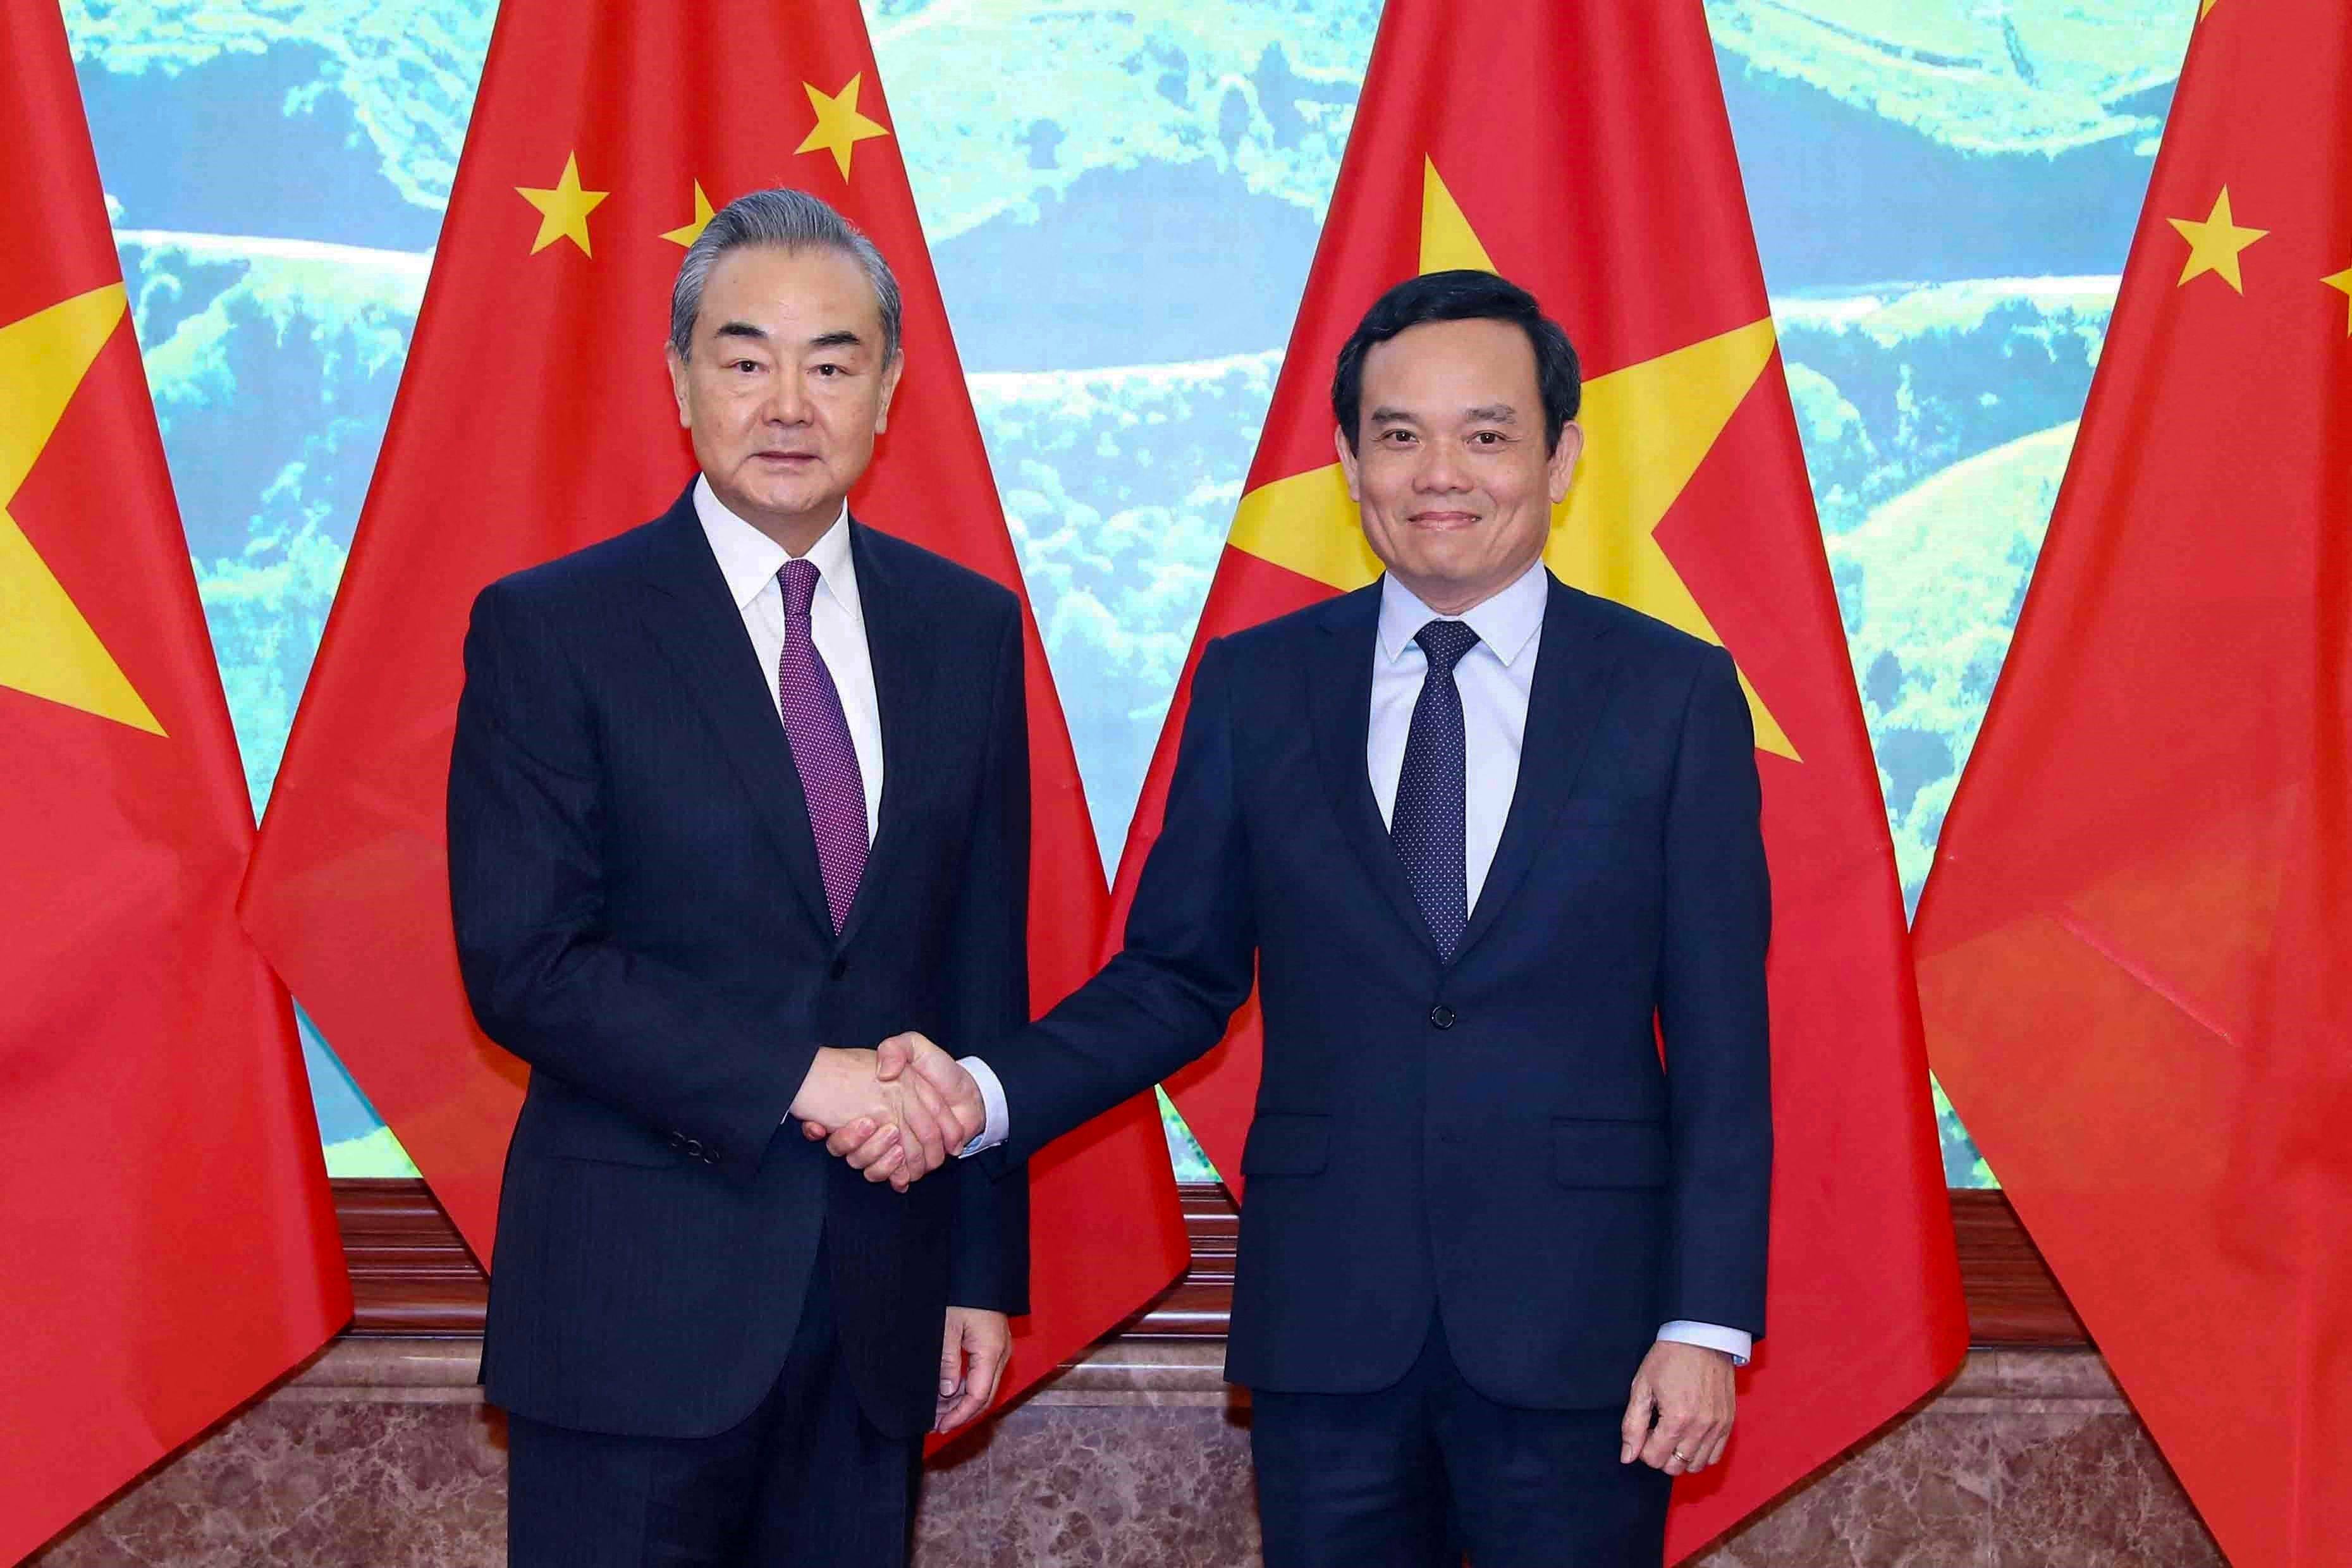 Chinese Foreign Minister Wang Yi (left) meets Vietnamese deputy prime minister Tran Luu Quang in Hanoi on Friday. Photo: Vietnam News Agency via AFP